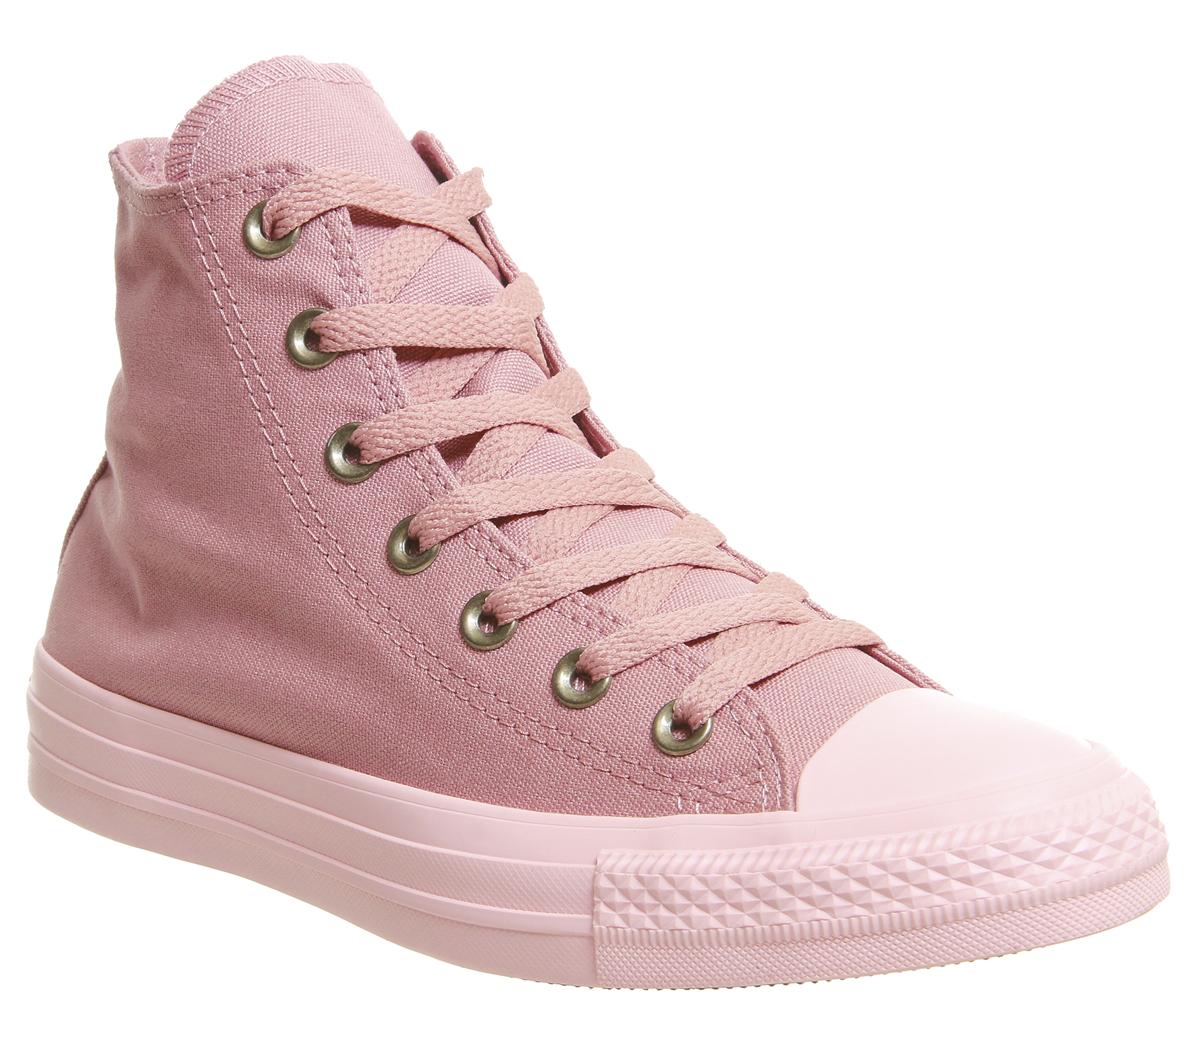 Star Hi Trainers Rust Pink - Hers trainers